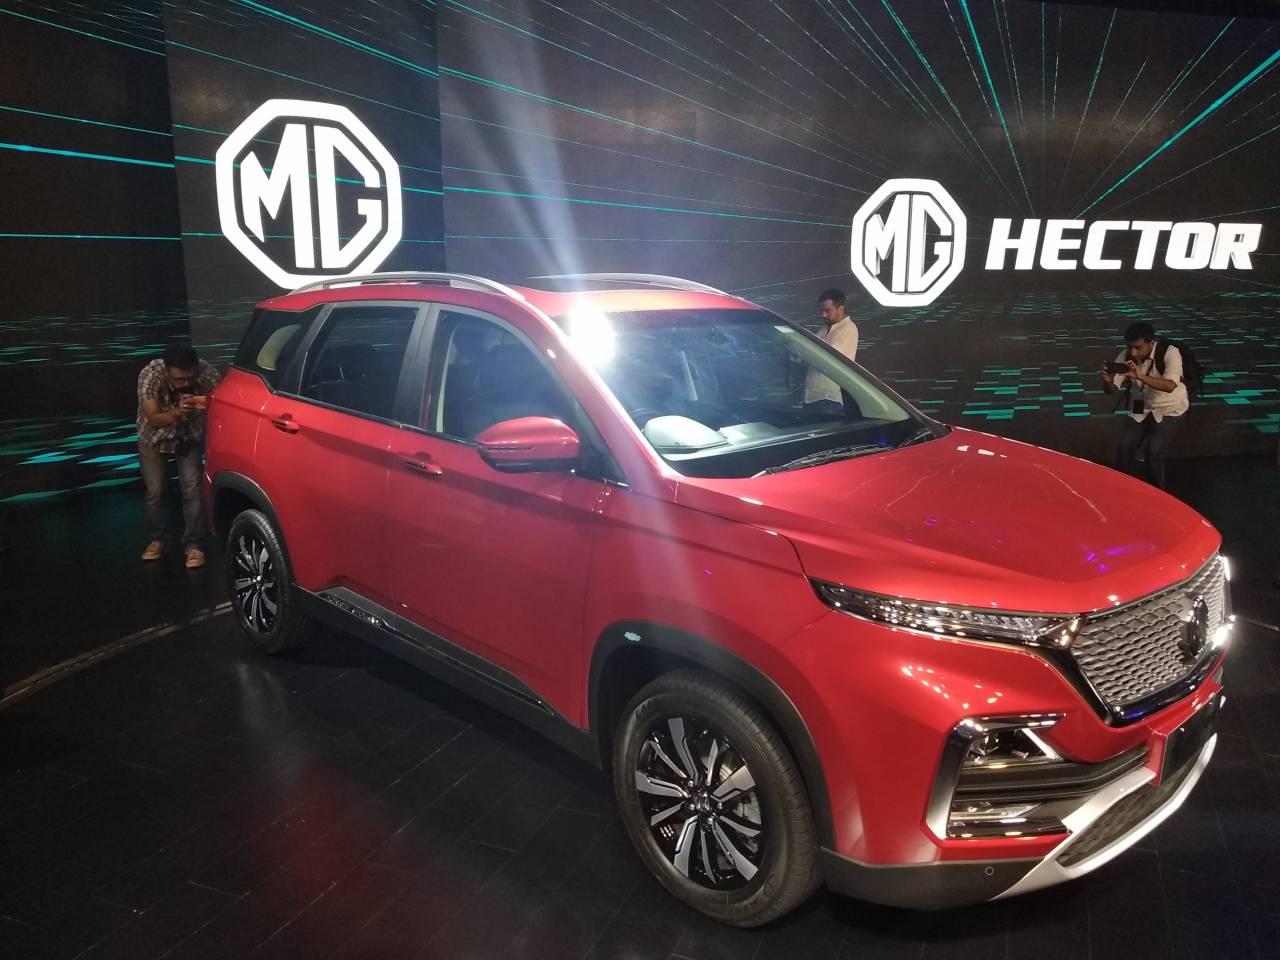 In Pics: MG Hector engine, price, variants, feature, launch details